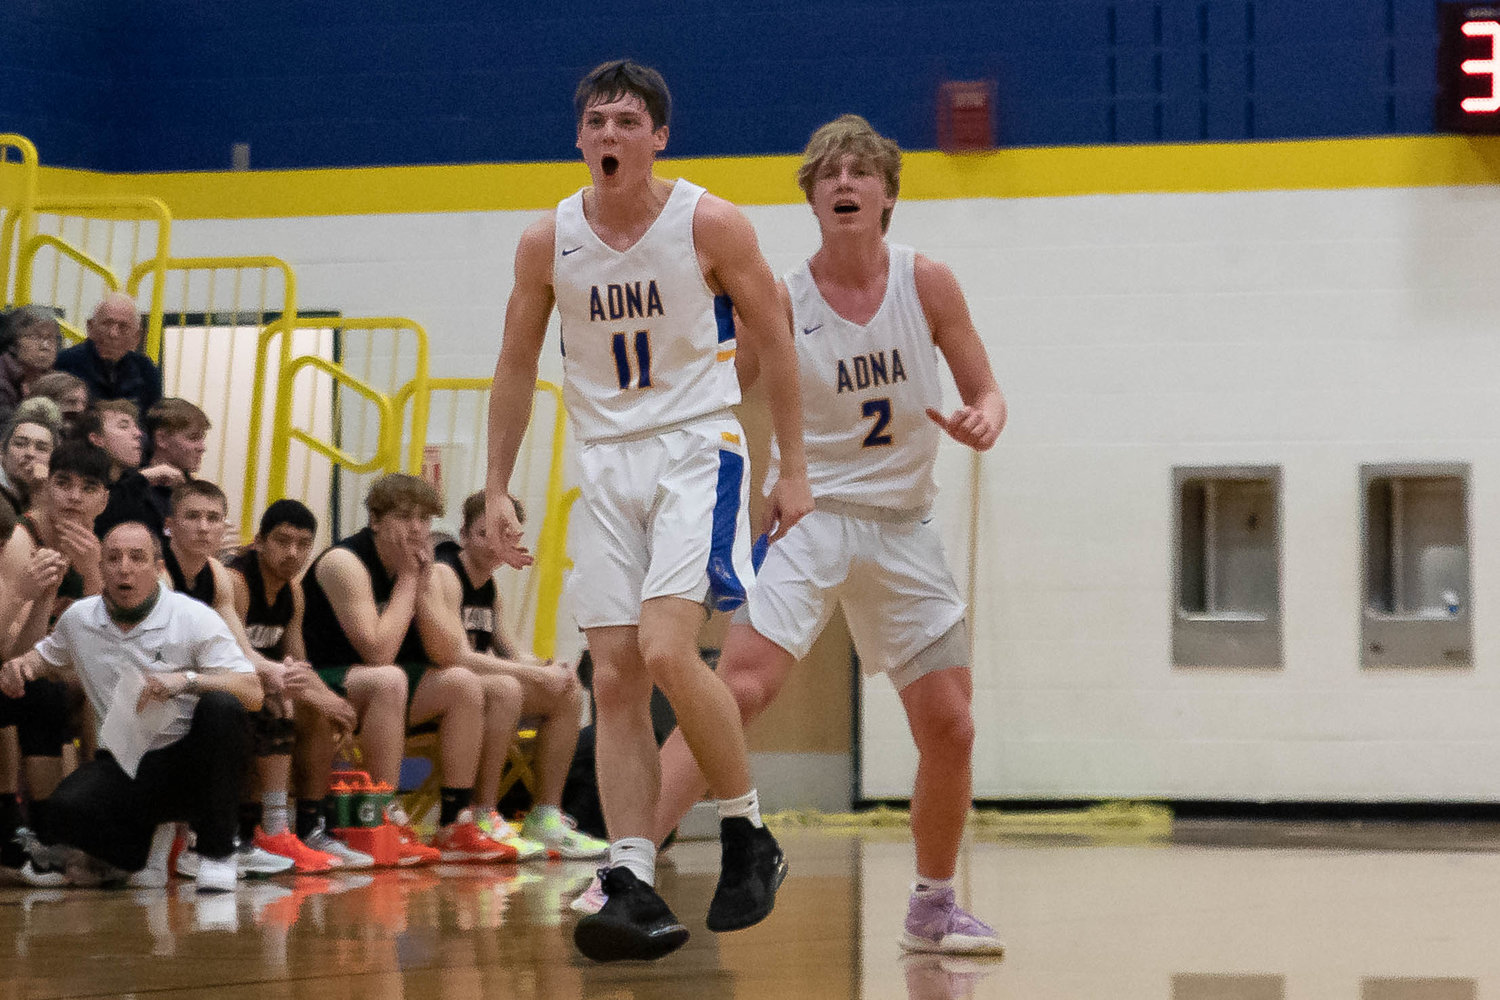 Adna guard Chase Collins (11) yells after Lane Johnson's (2) 3-pointer in the second half against MWP Jan. 28.